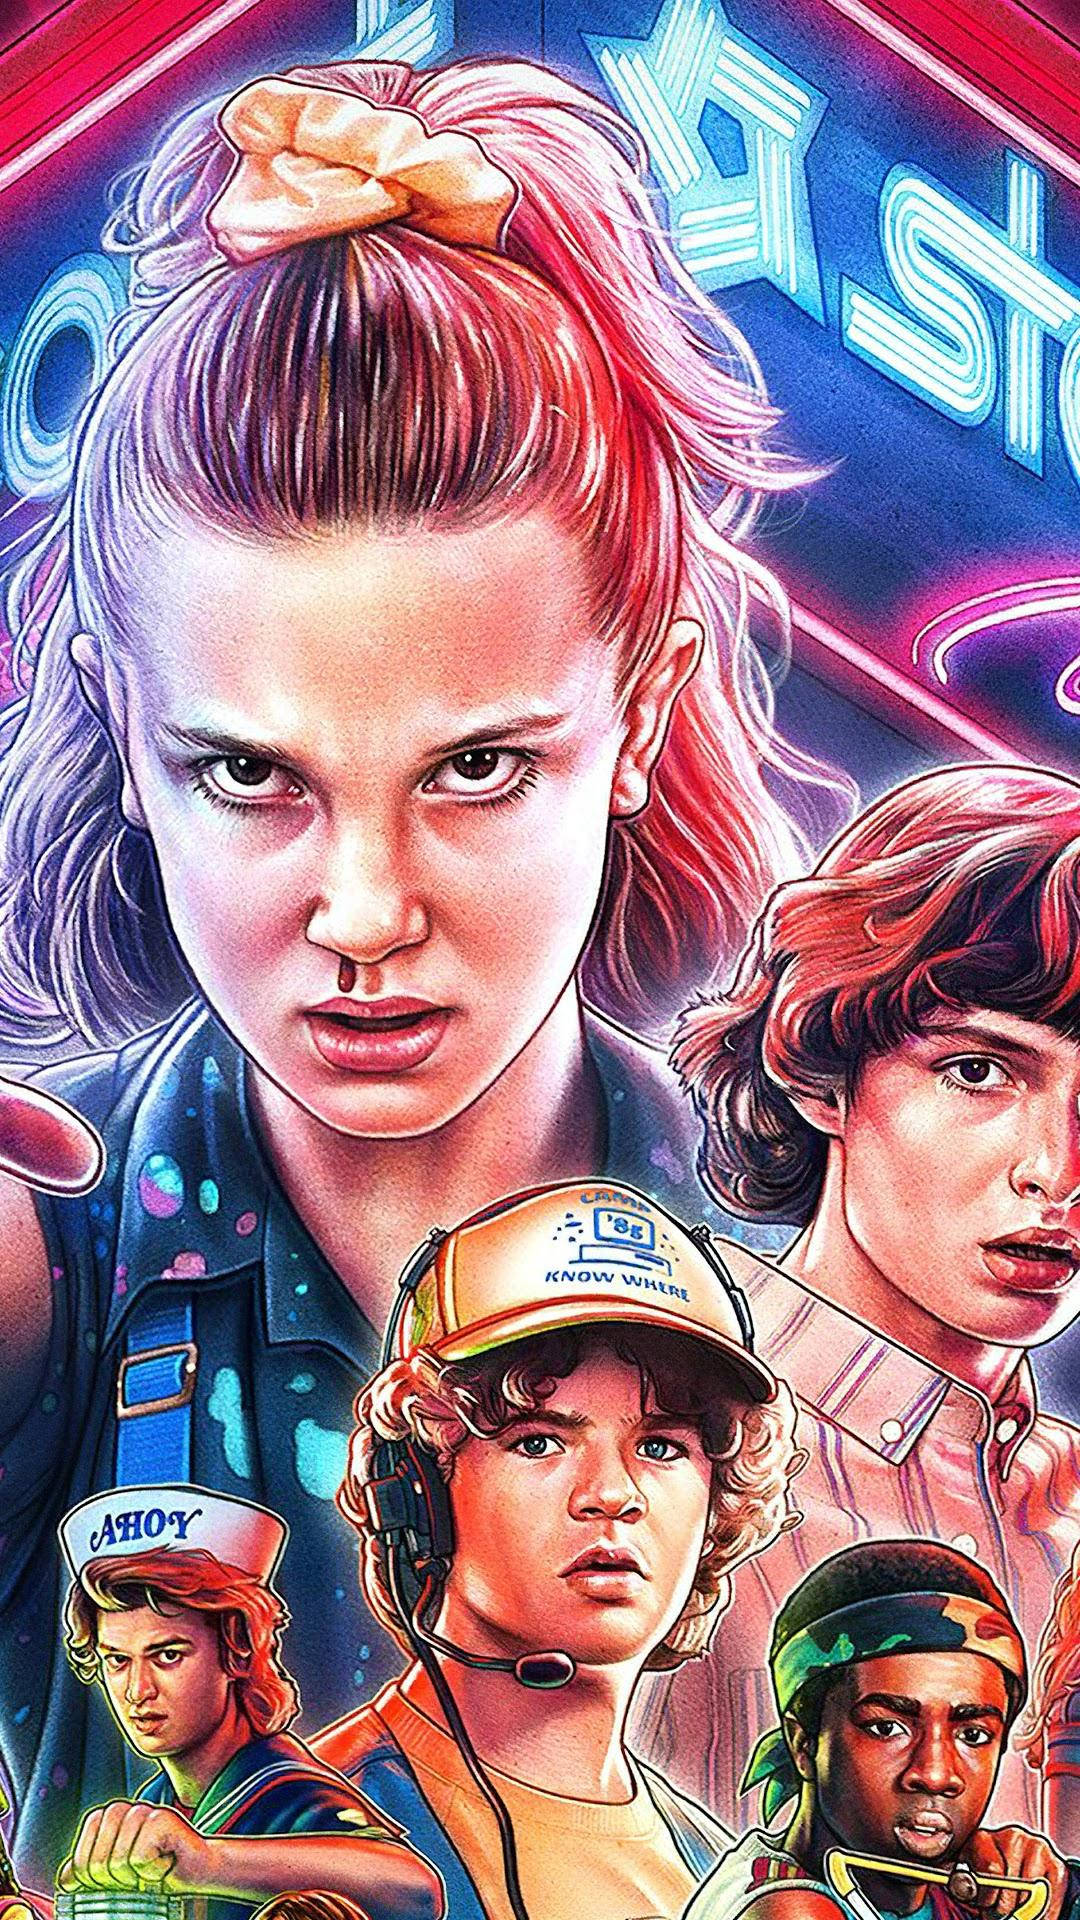 Get in the Upside Down with the Stranger Things iPhone Wallpaper